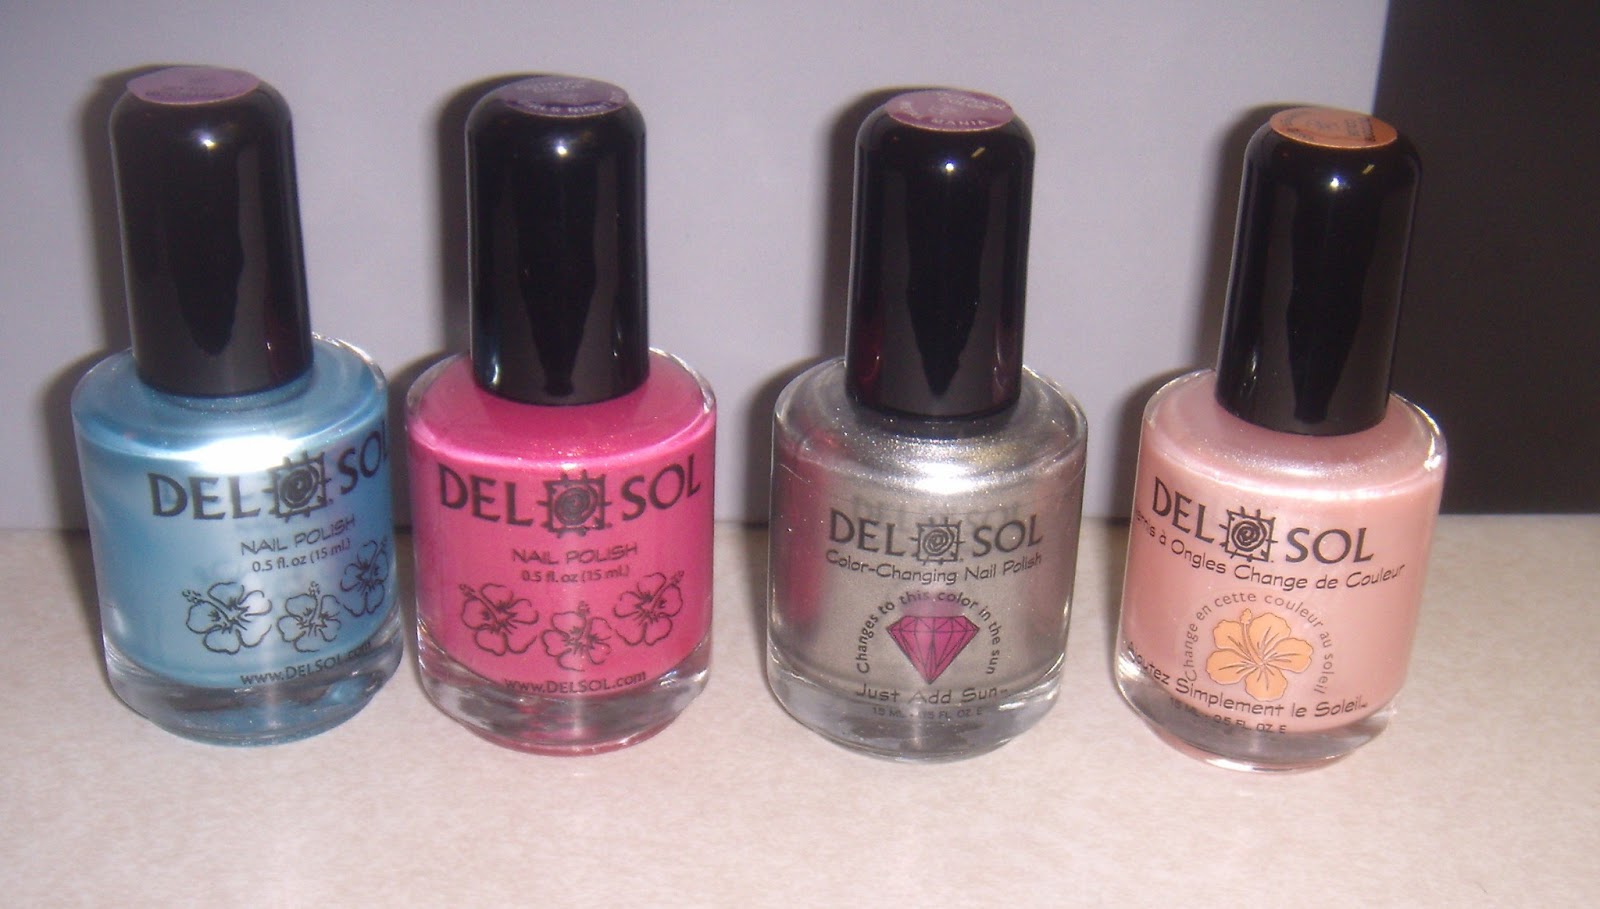 1. Del Sol Color Changing Nail Polish - wide 9